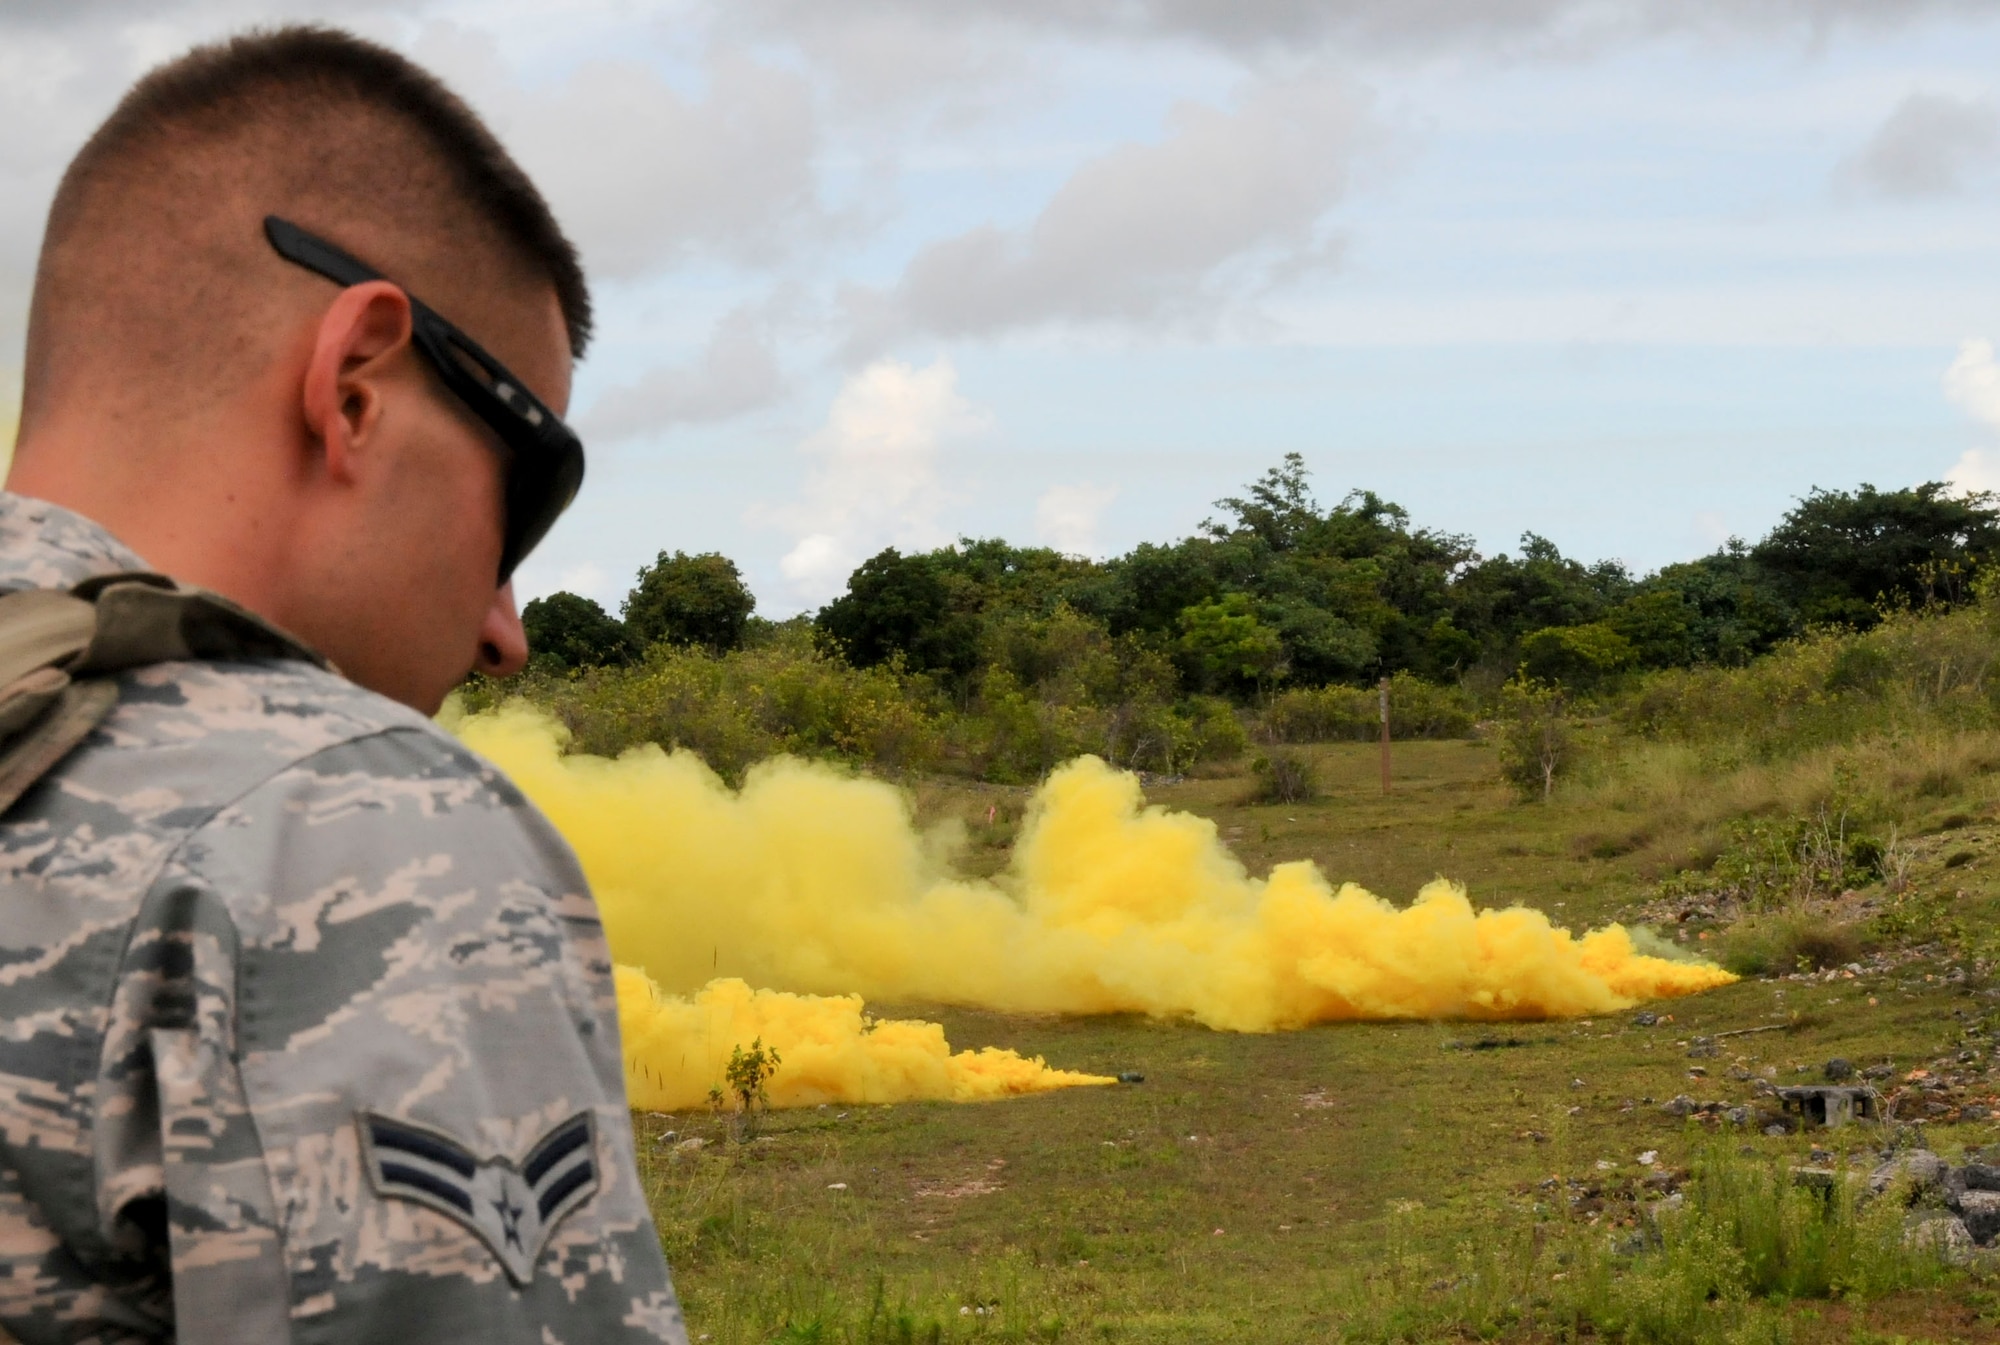 Airman 1st Class Shane Bigham, 36th Civil Engineer Squadron Explosive Ordnance Disposal flight, ensures the field is safe before throwing a smoke grenade, Aug. 26, 2013, on Andersen Air Force Base, Guam. EOD trained Airmen on GBS and smoke grenades to provide a sense of reality during an exercise. (U.S. Air Force photo by Airman 1st Class Amanda Morris/Released)